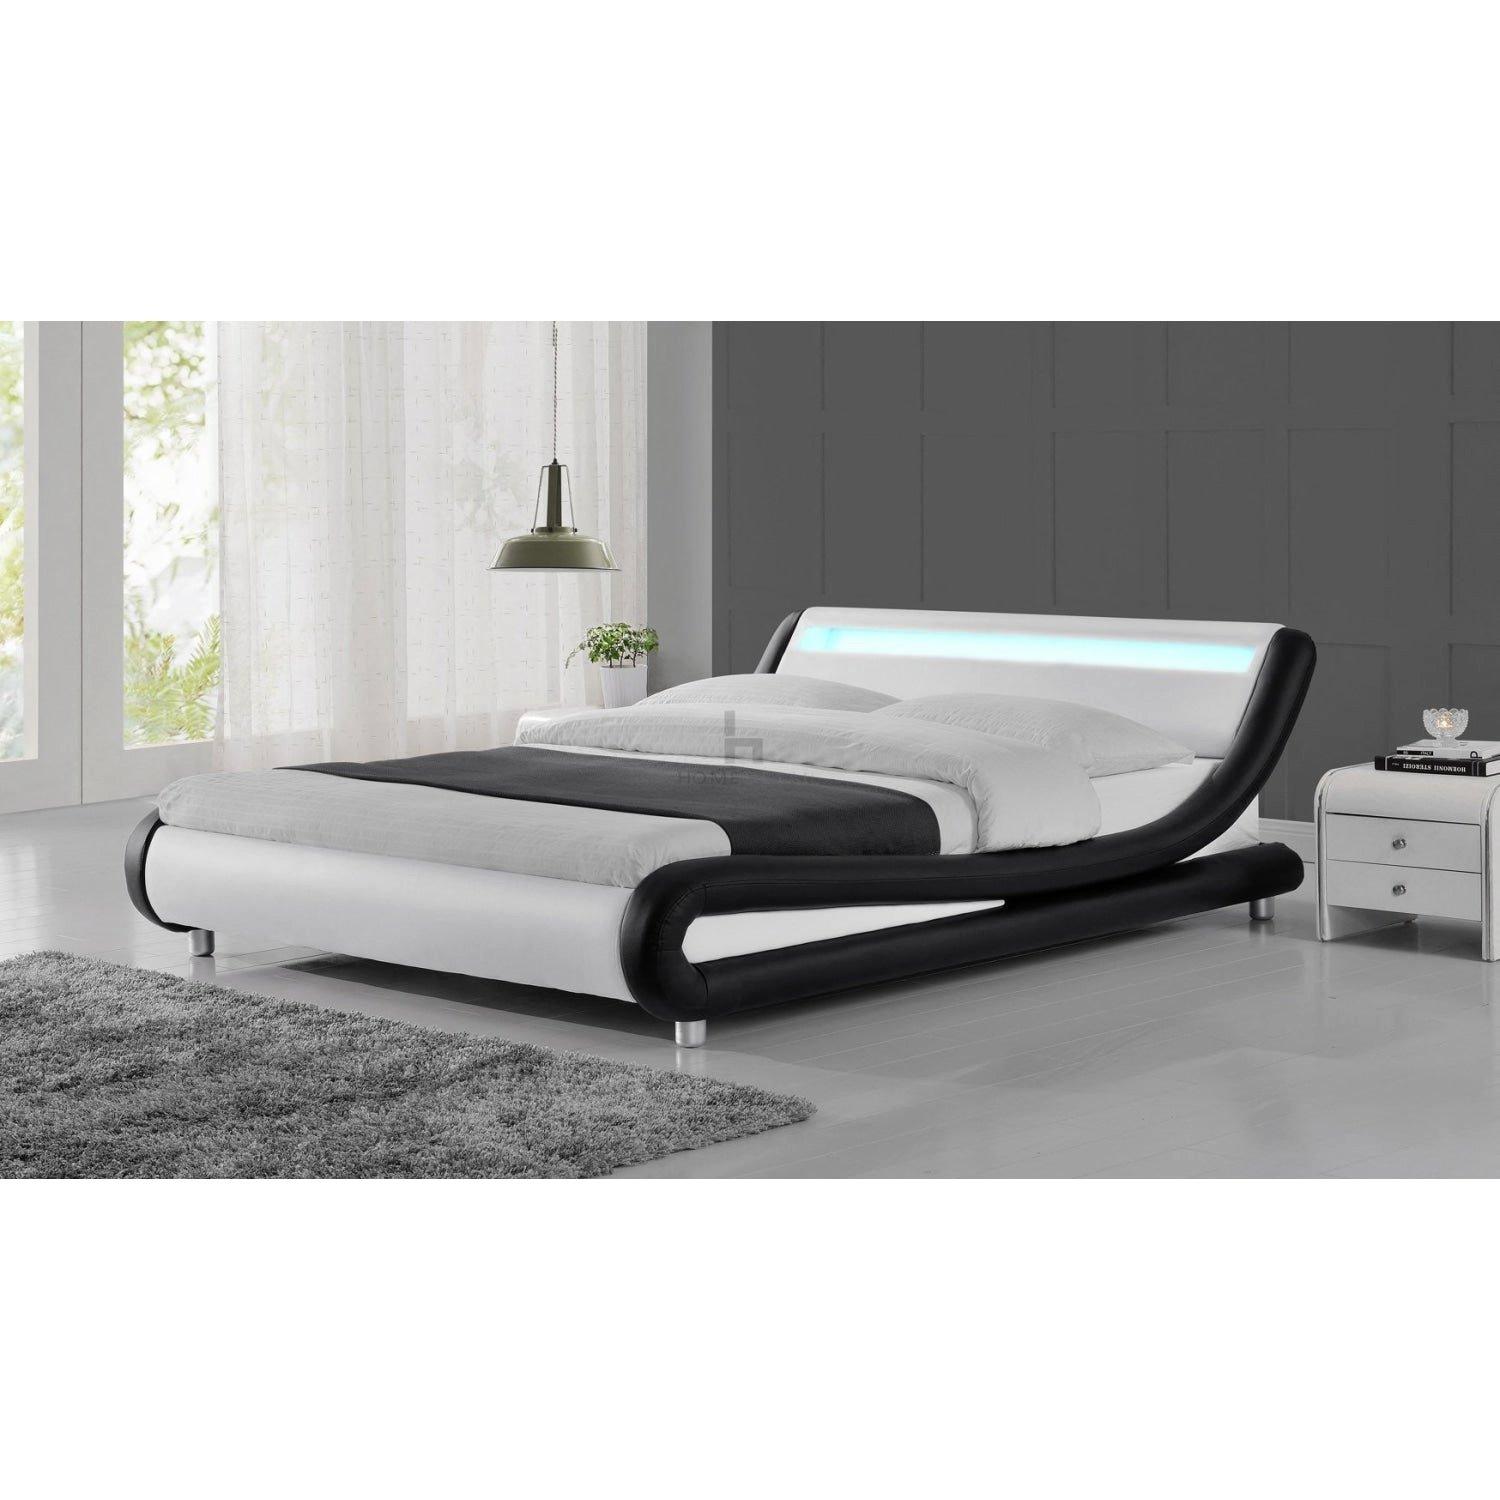 Galaxy LED Black & White Faux Leather Bed